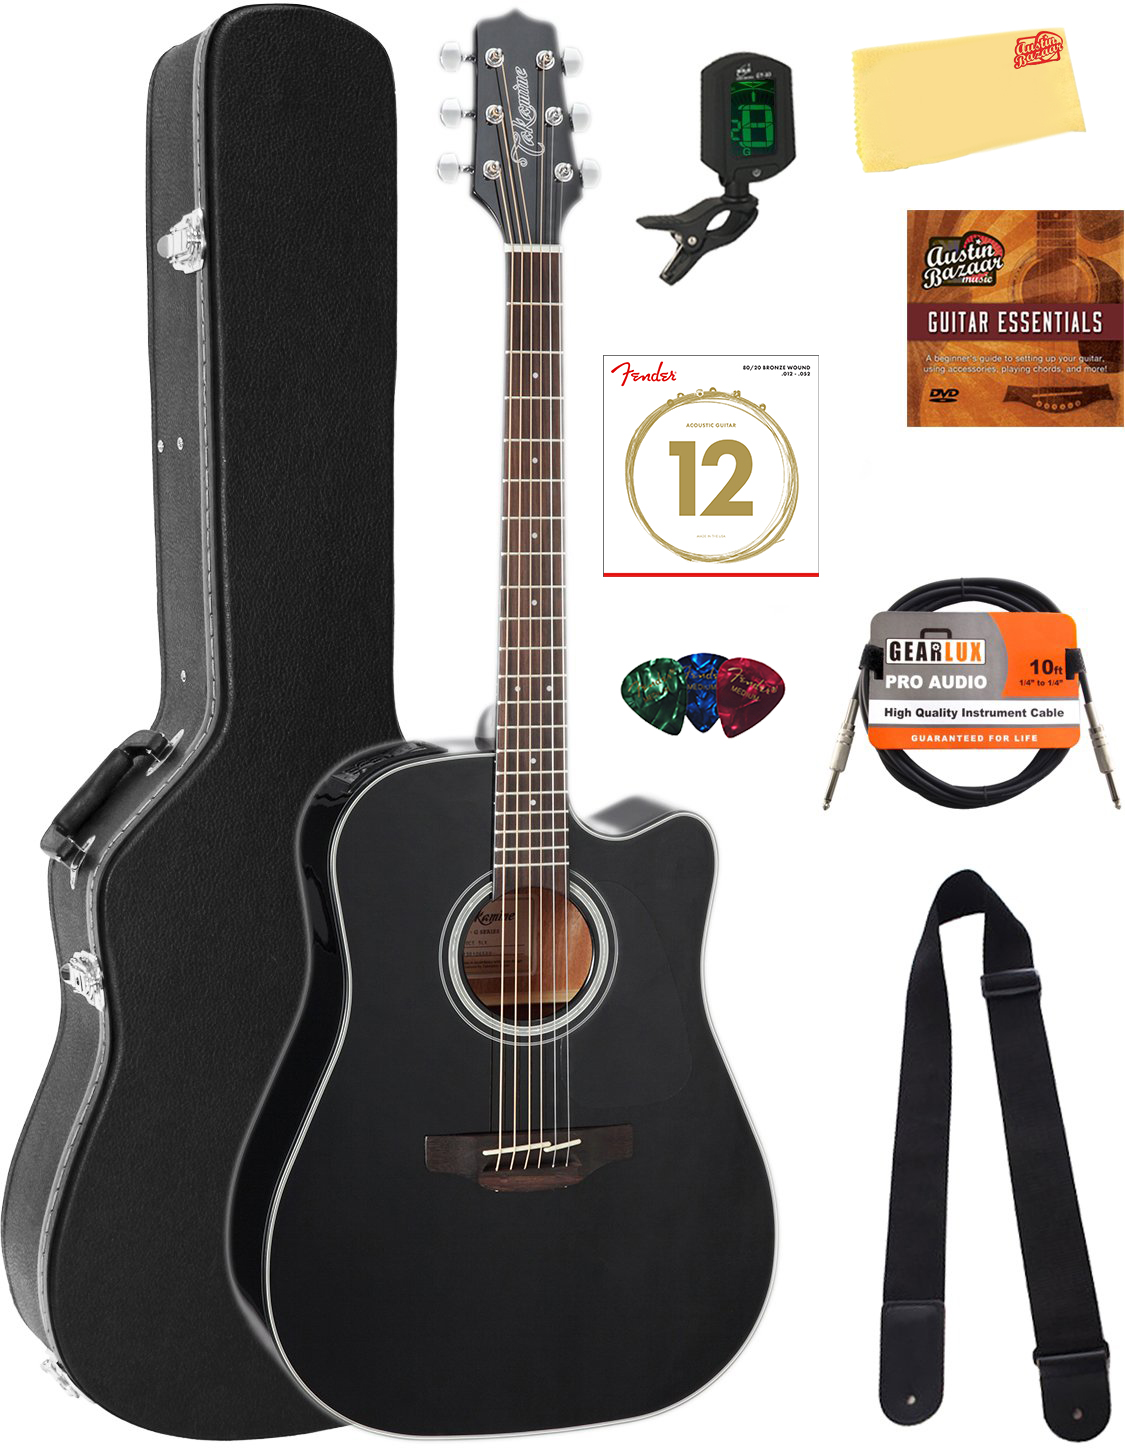 Takamine GD30CE Dreadnought Acoustic-Electric Guitar - Black w/